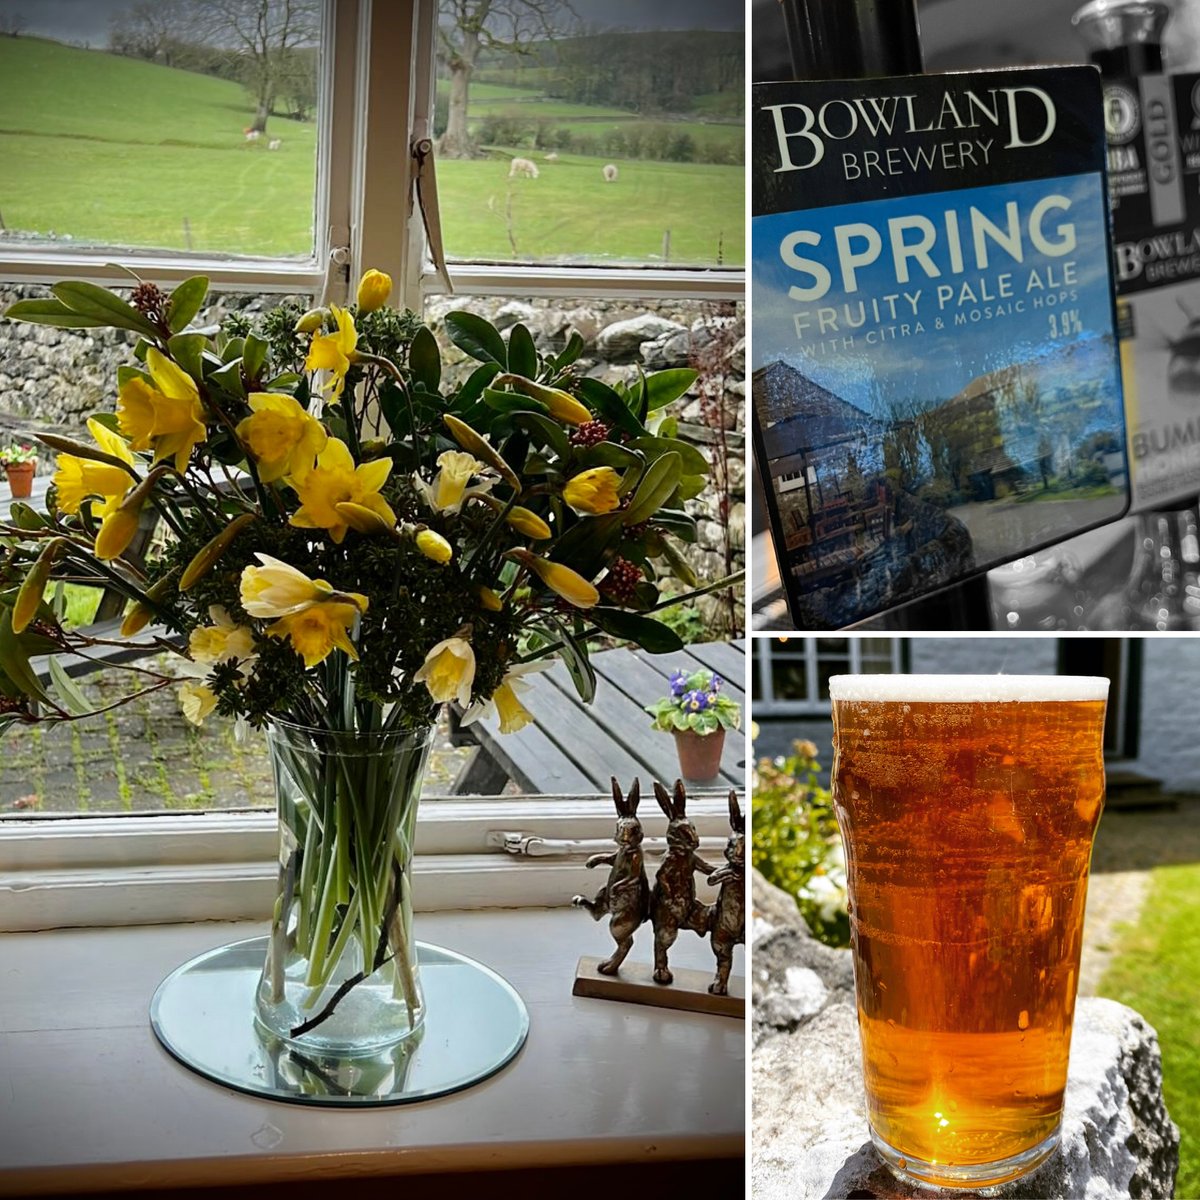 Spring is in the air..... and on tap! This fabulous fresh and fruity pale ale from Bowland Brewery is our #perfectpint guest ale for just £3.50 🍺 all weekend. Cheers! #realale #springishere #CAMRA #beer #countrypub